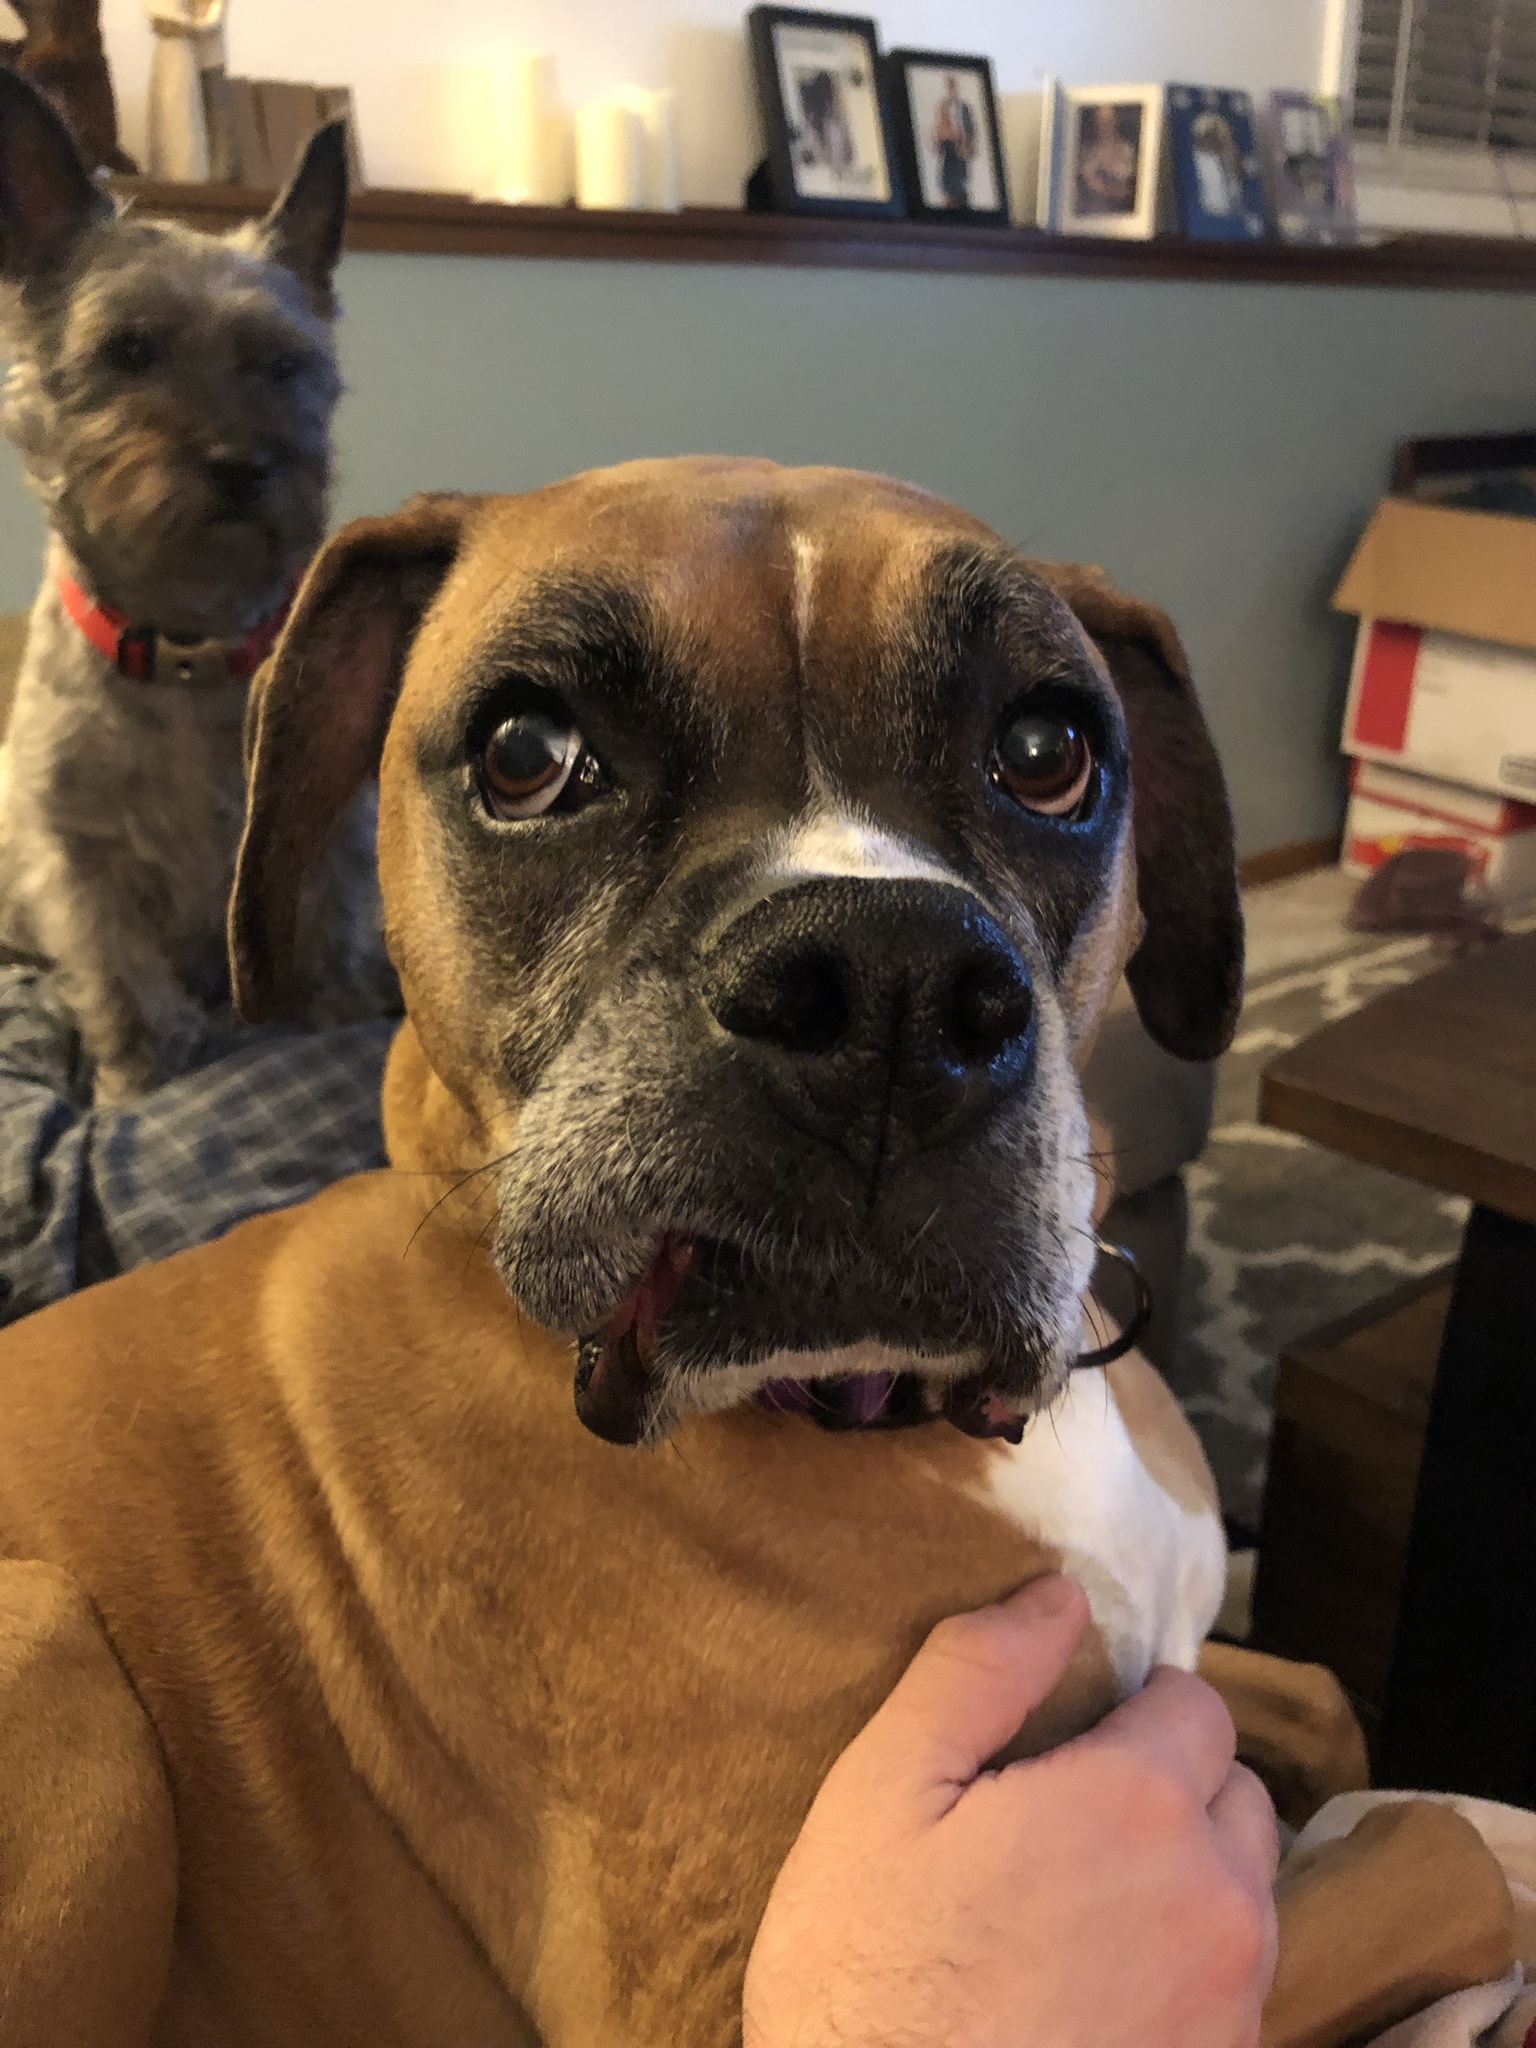 Boxer Dog sitting on the couch with a dog behind him